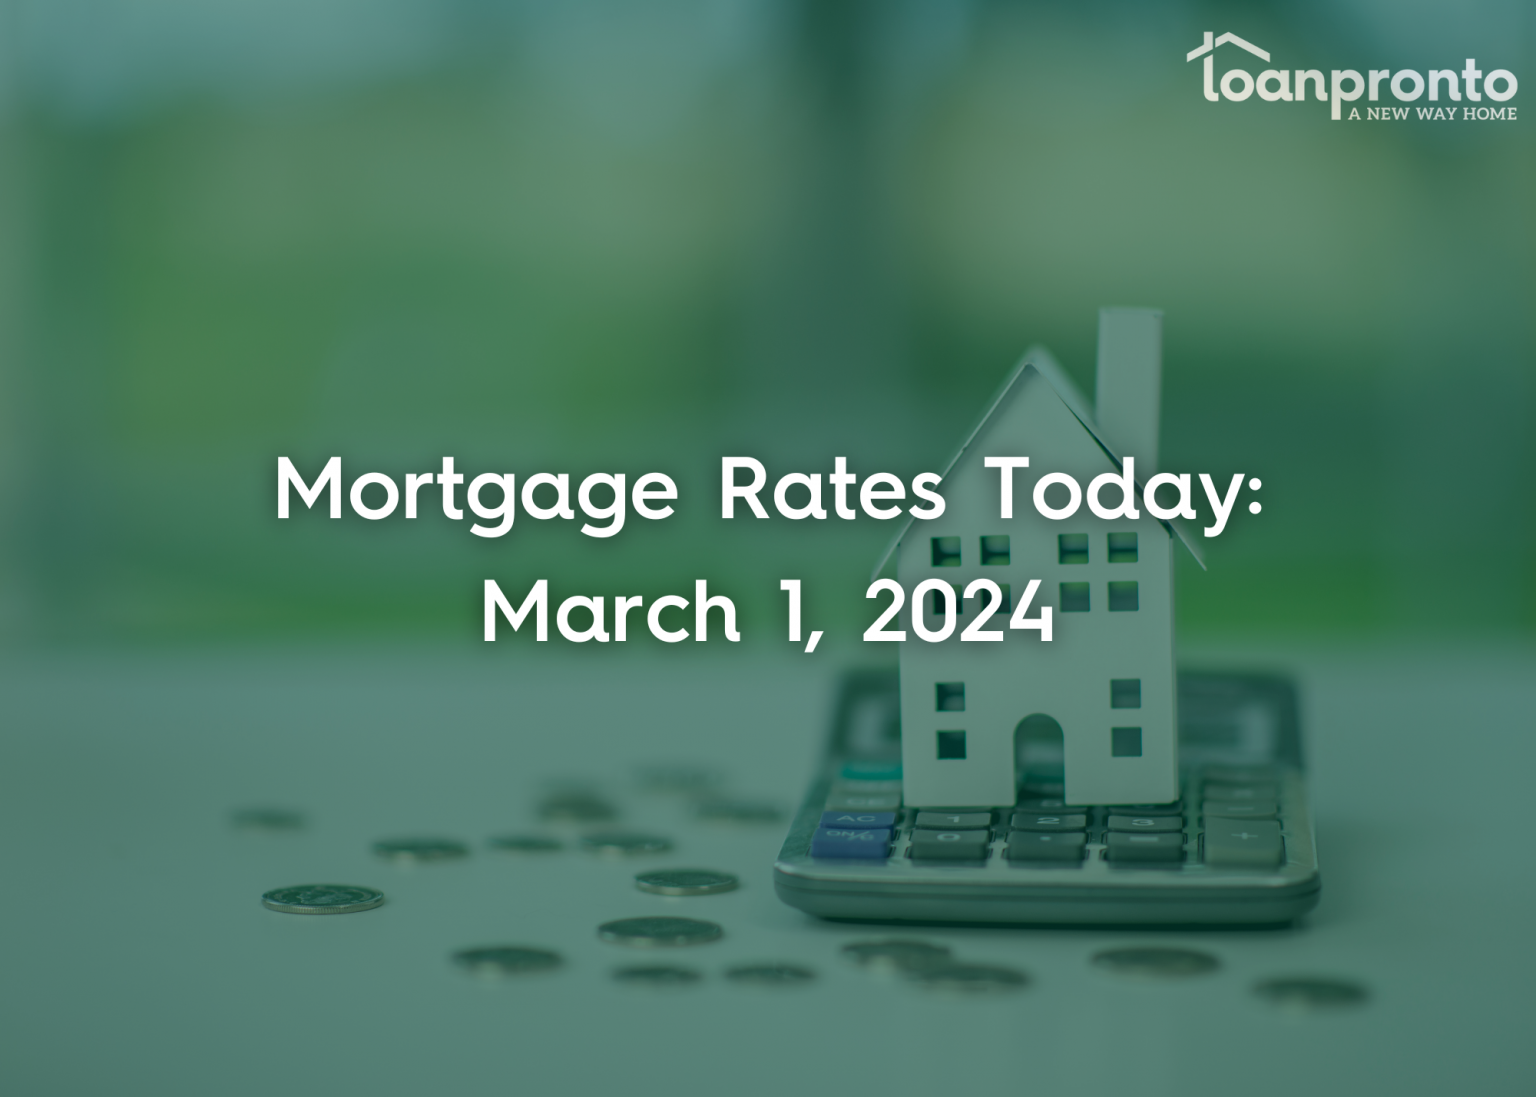 mortgage rate update. March 1, 2024. Positive week for mortgage rates. improvement on 30 year fixed loan. Awaiting February jobs report